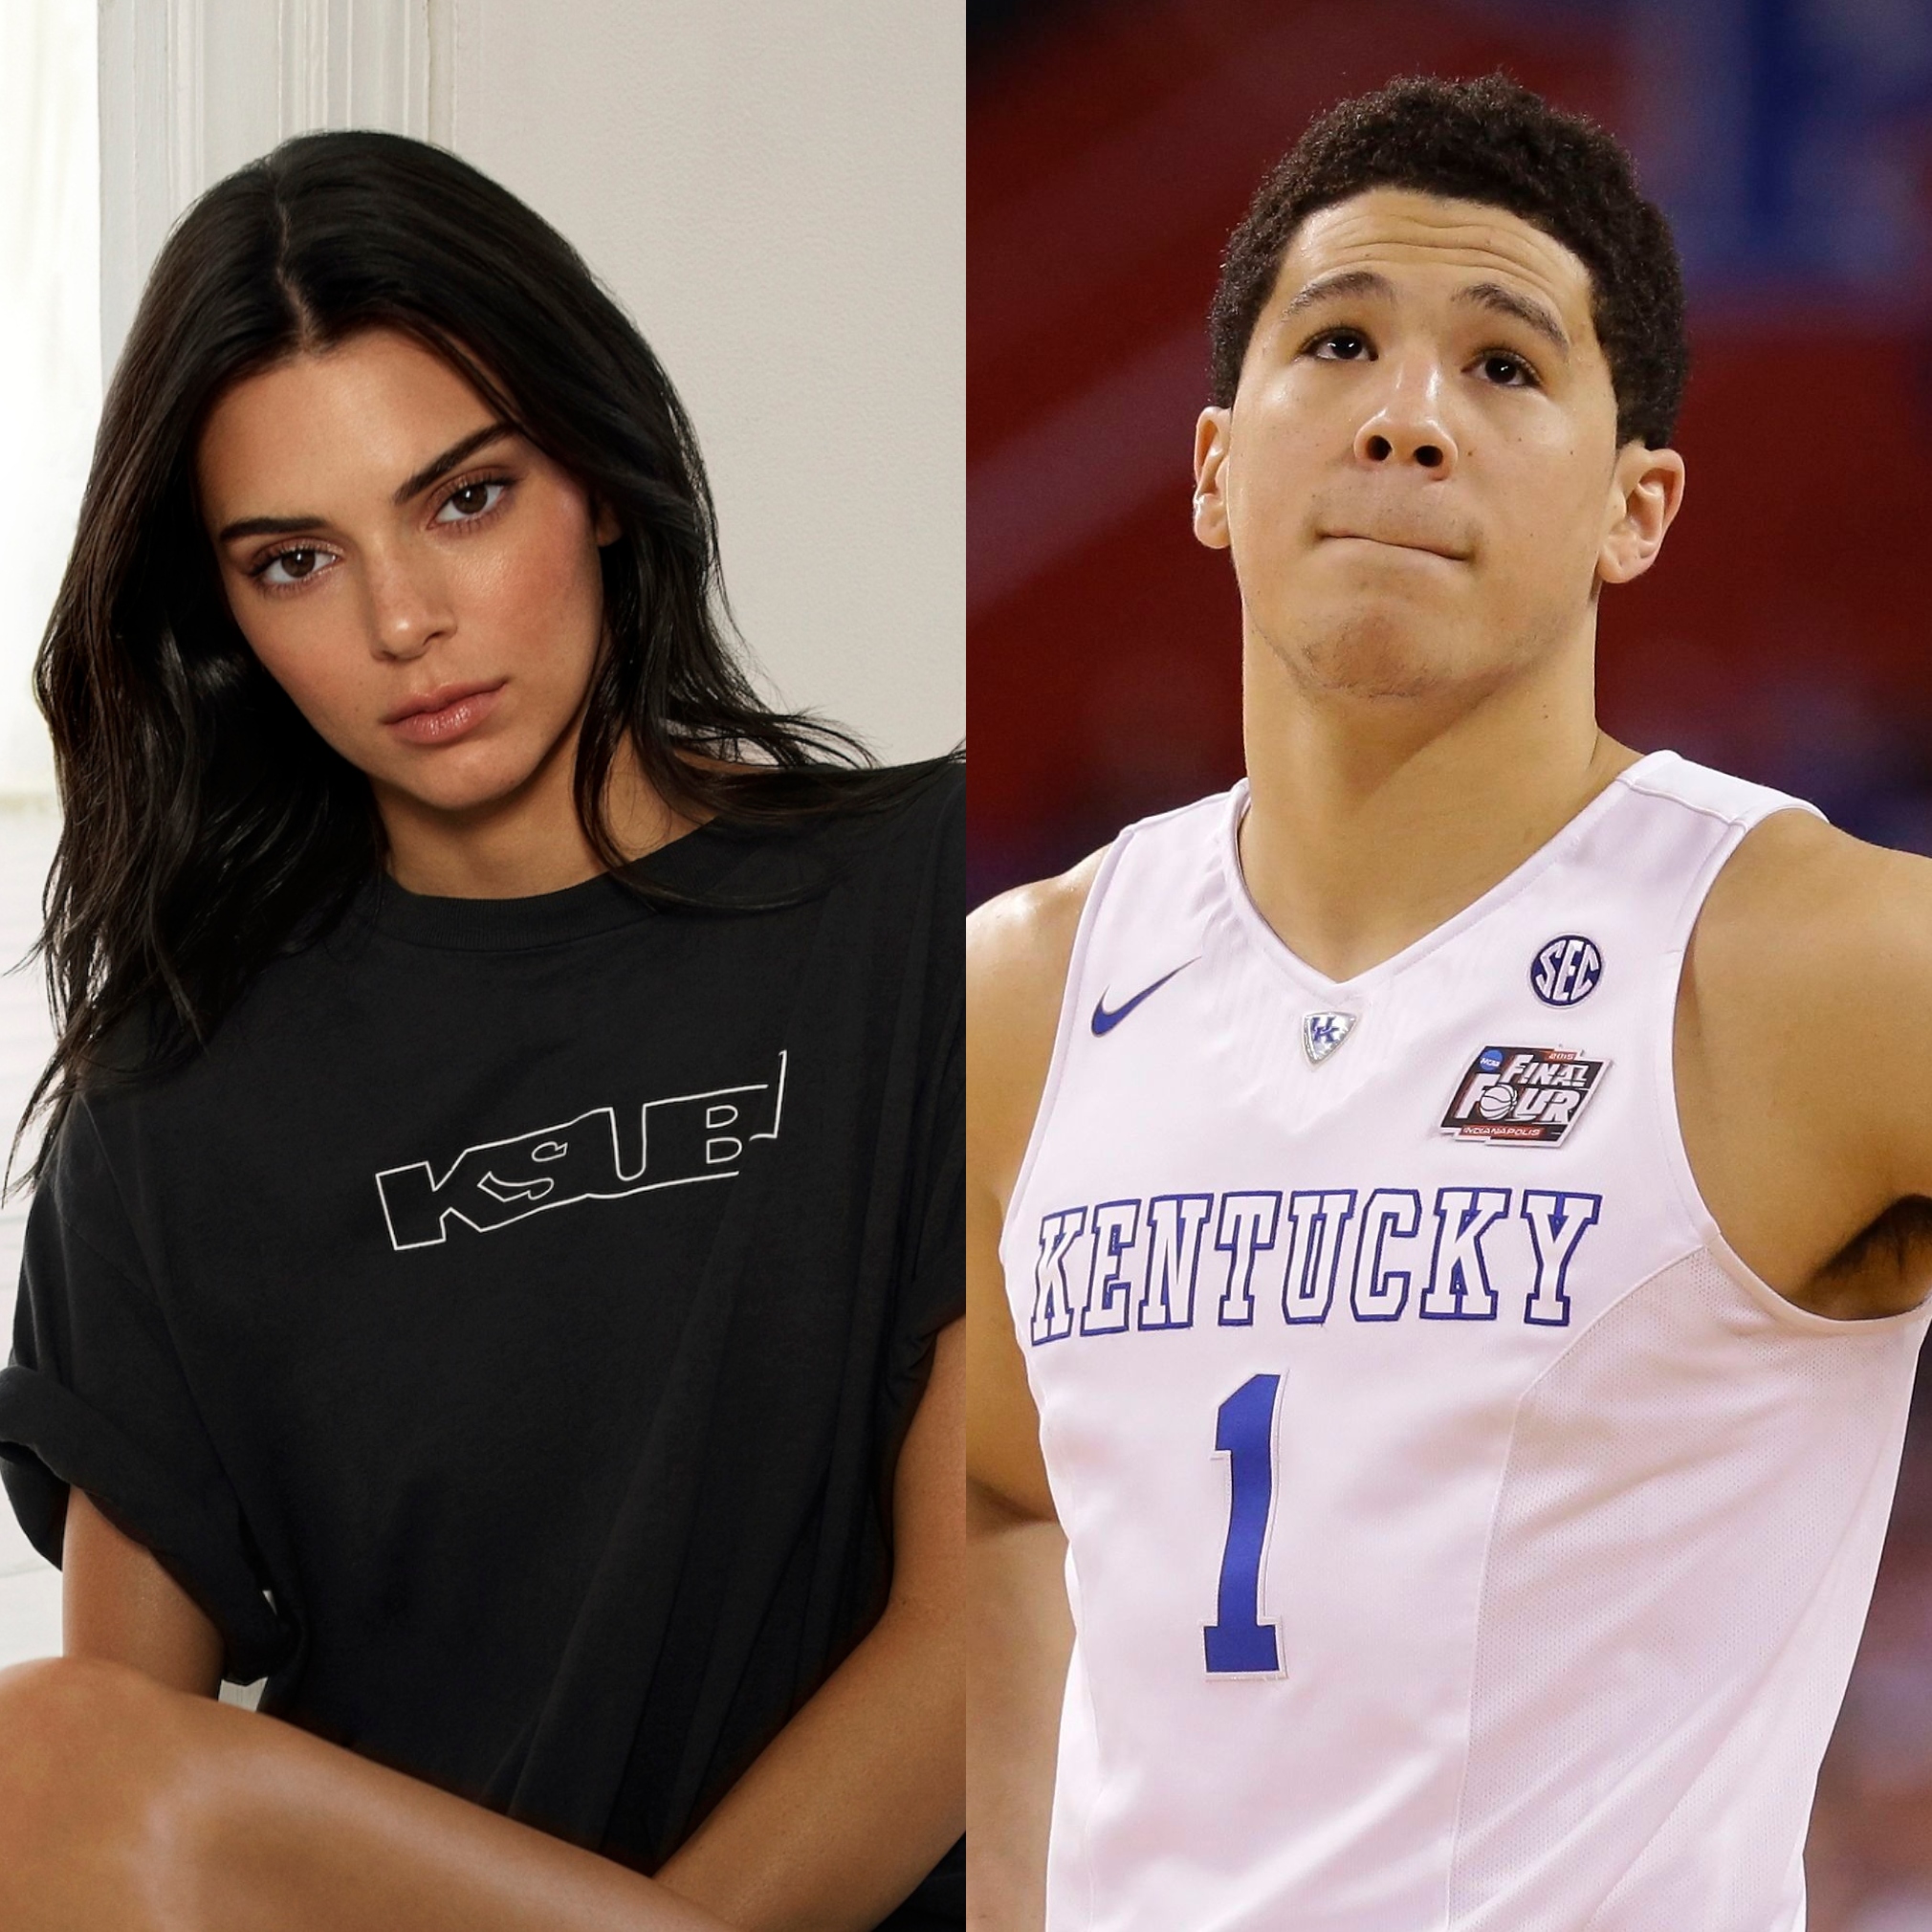 Kendall Jenner And Devin Booker S Chemistry Is Off The Charts [ 2020 x 2020 Pixel ]